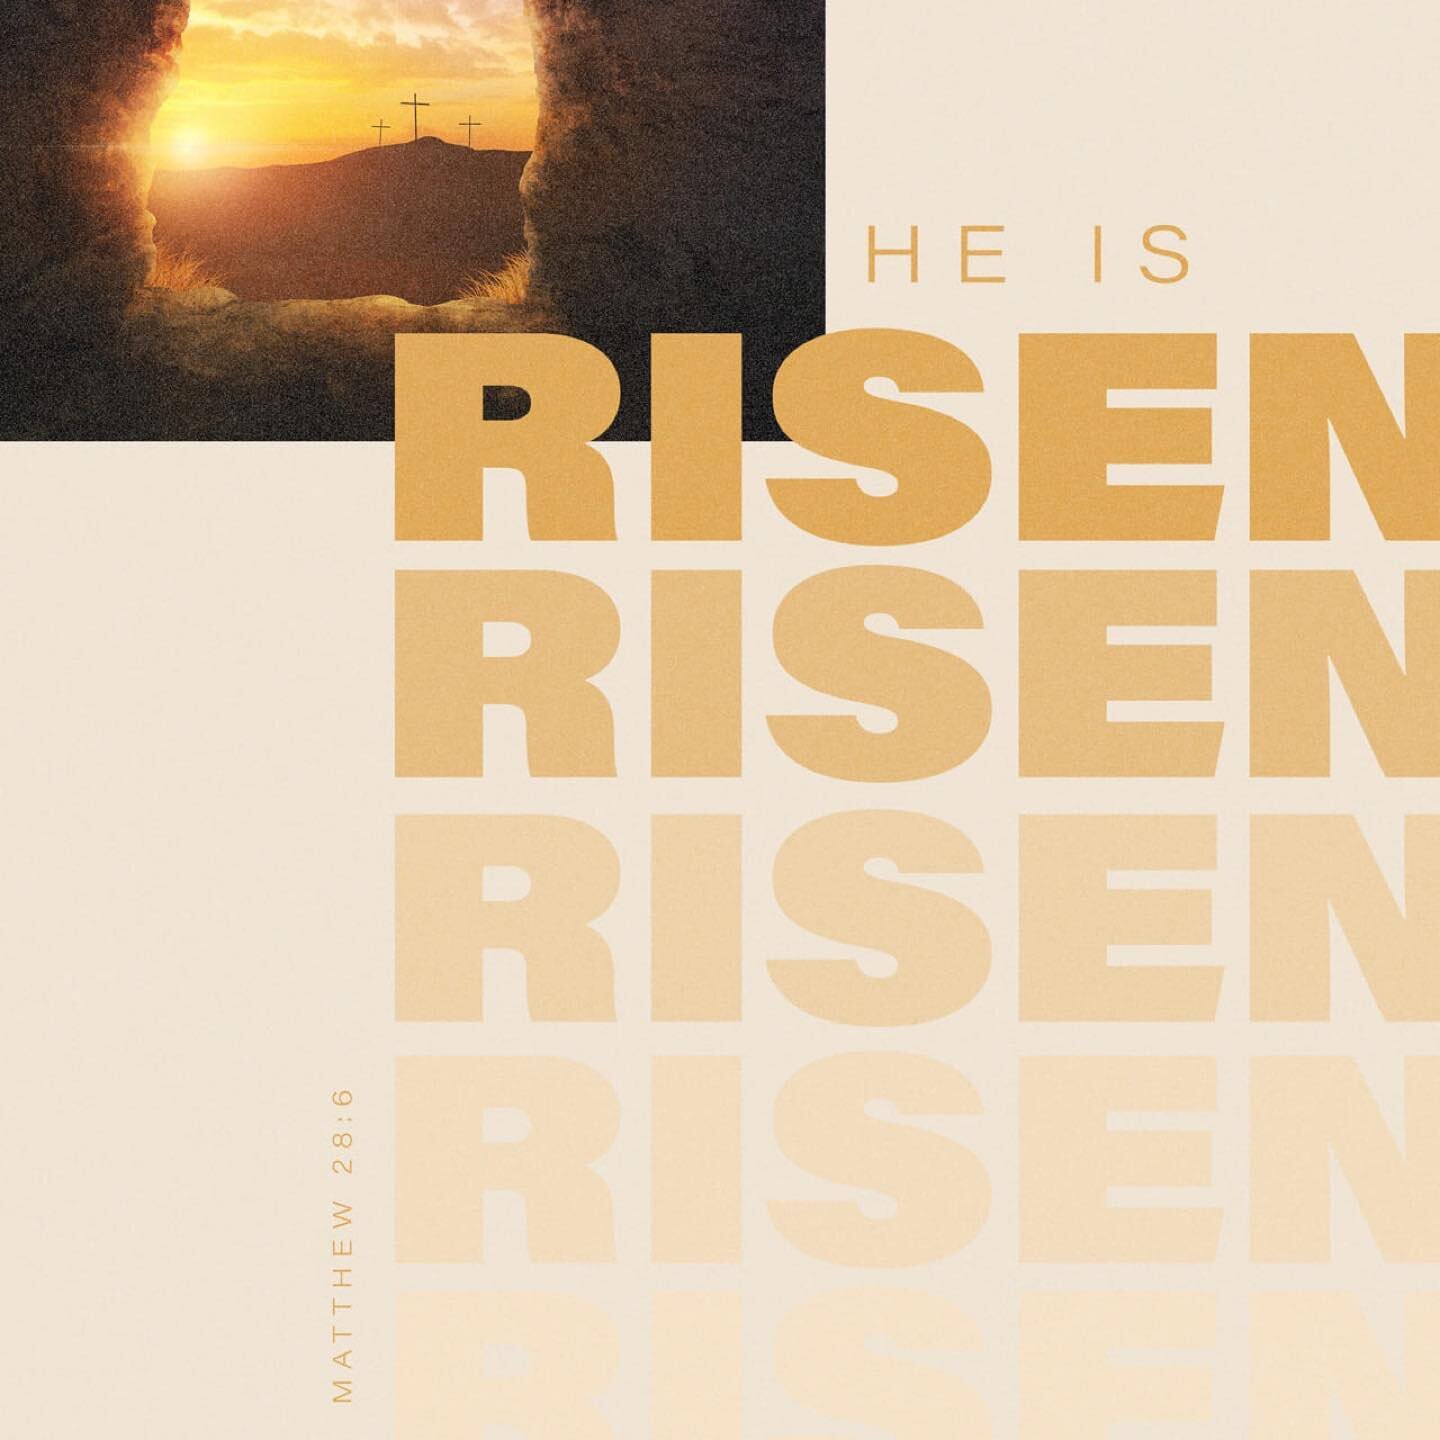 Happy Resurrection Sunday! The King of Kings was raised to life and because of that we have a LIVING HOPE!!